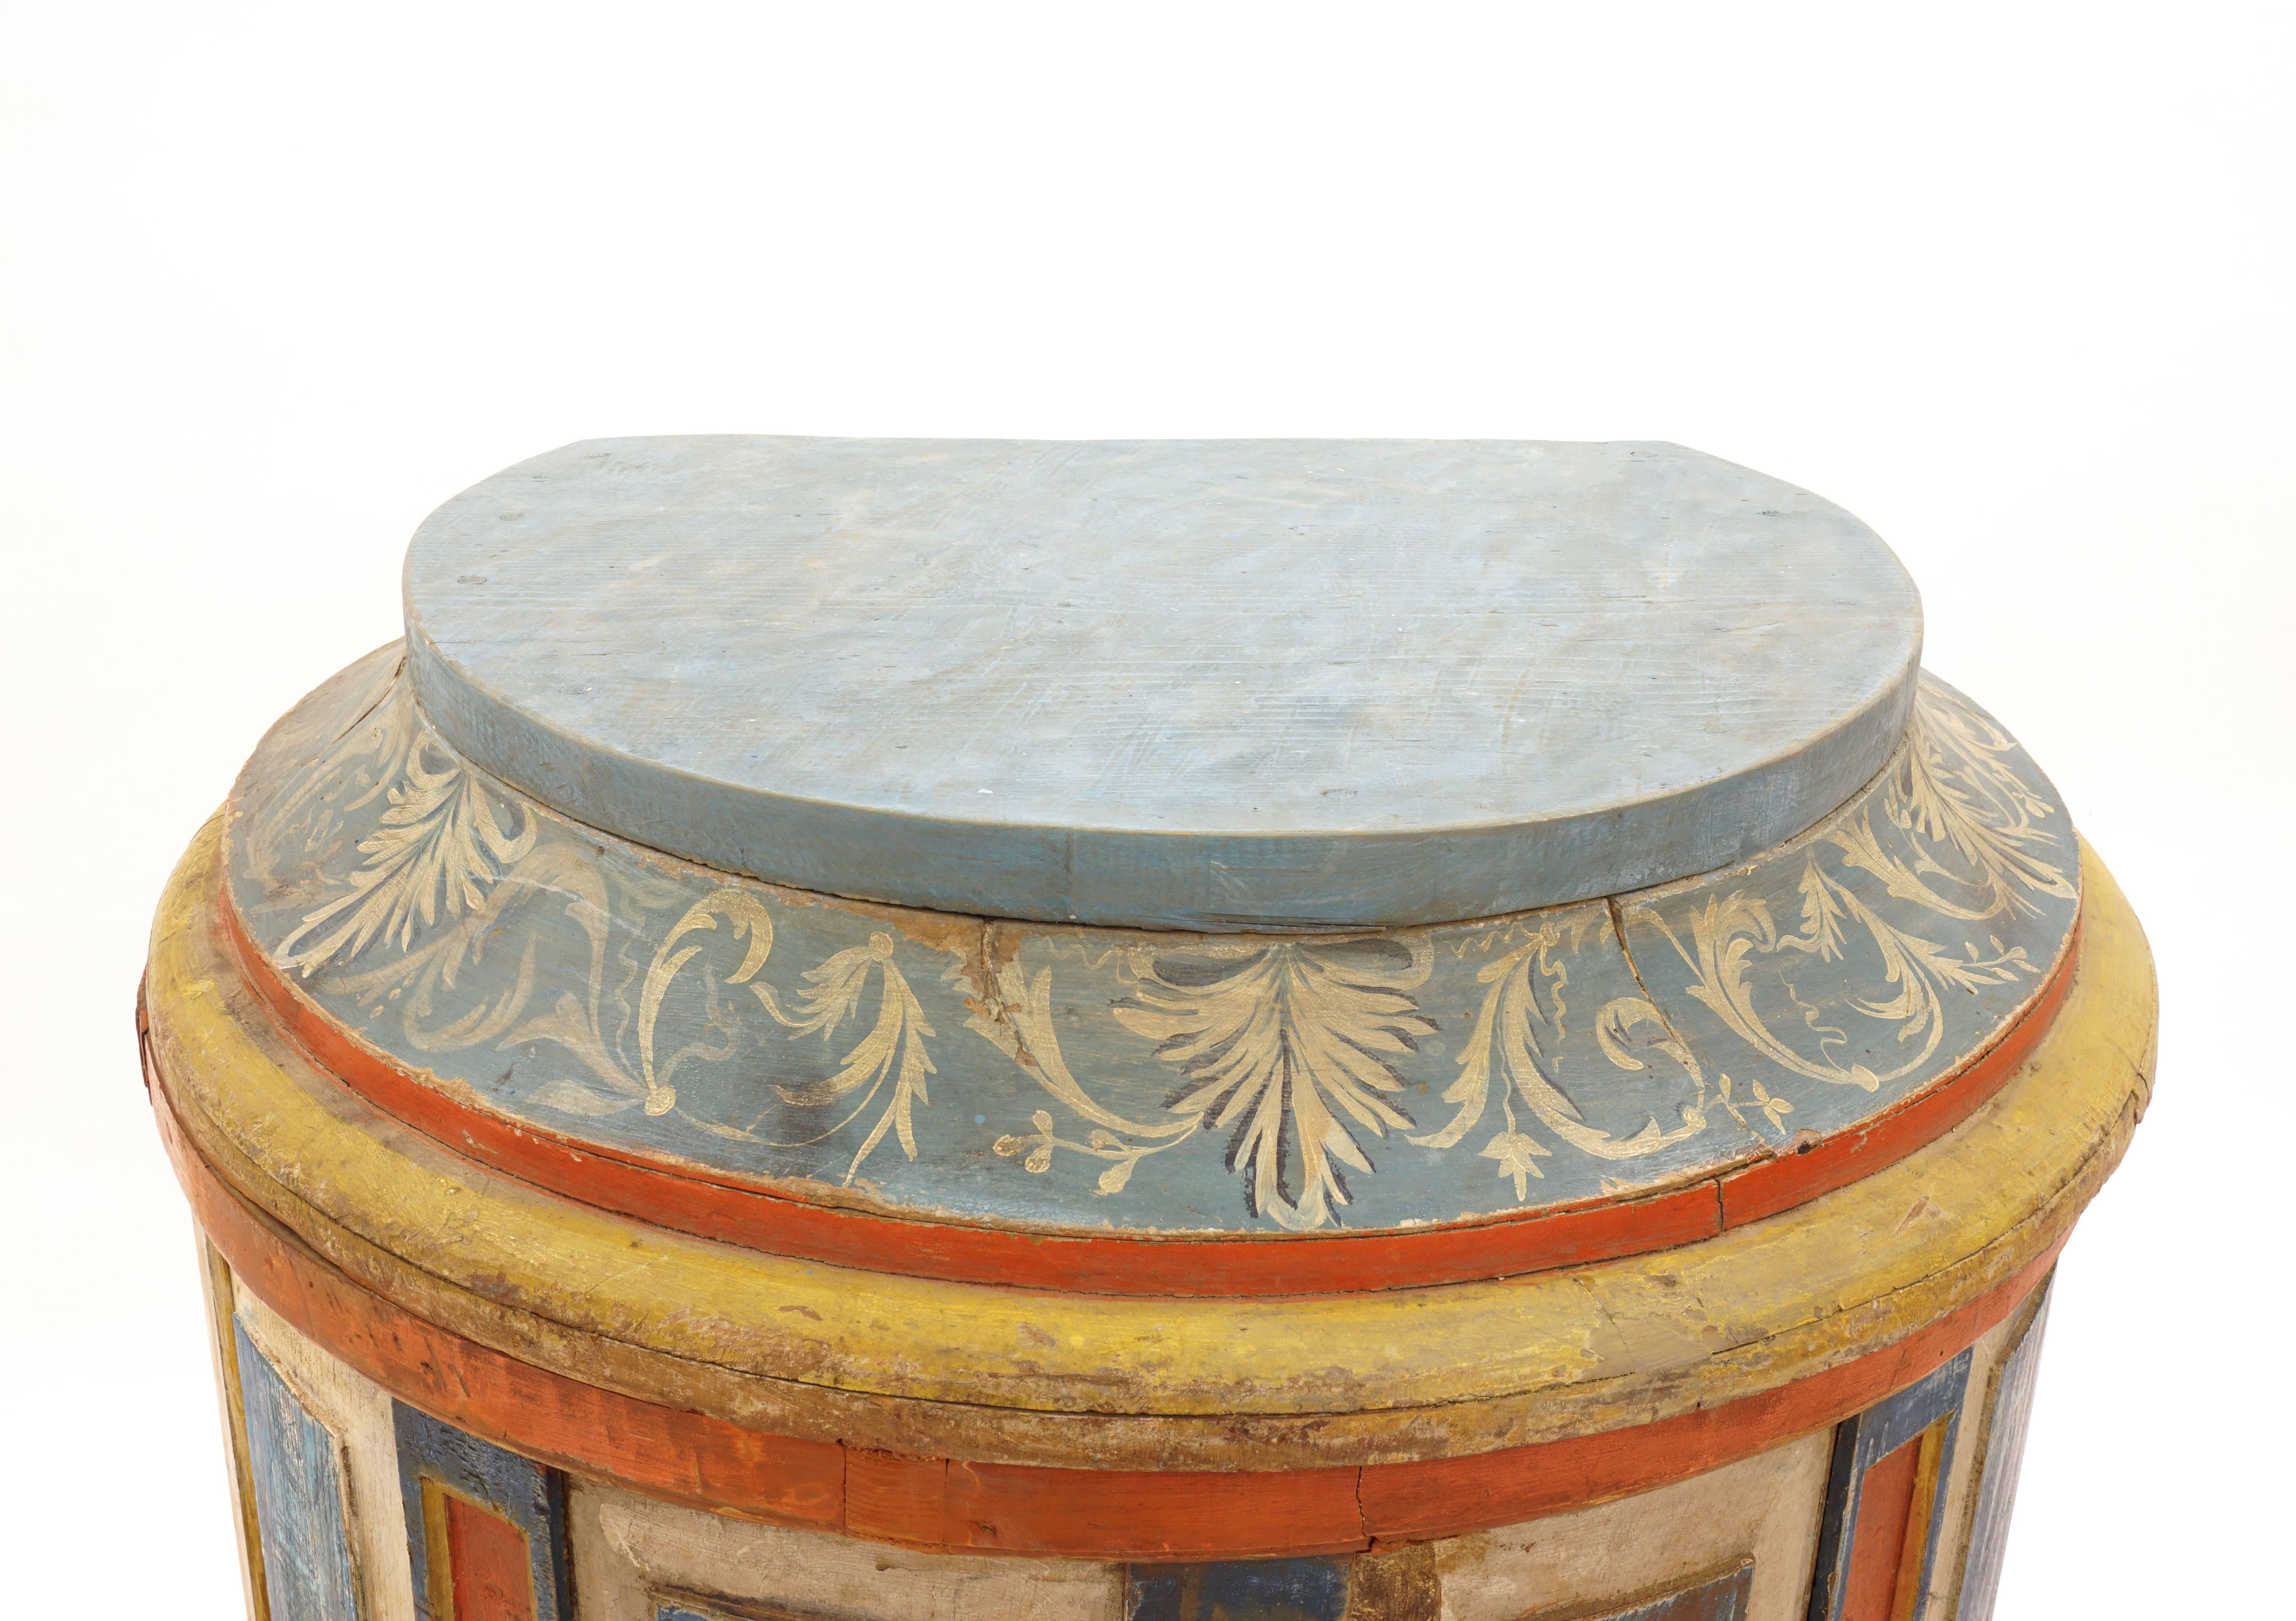 Early 19th century late Gustavian pedestal.